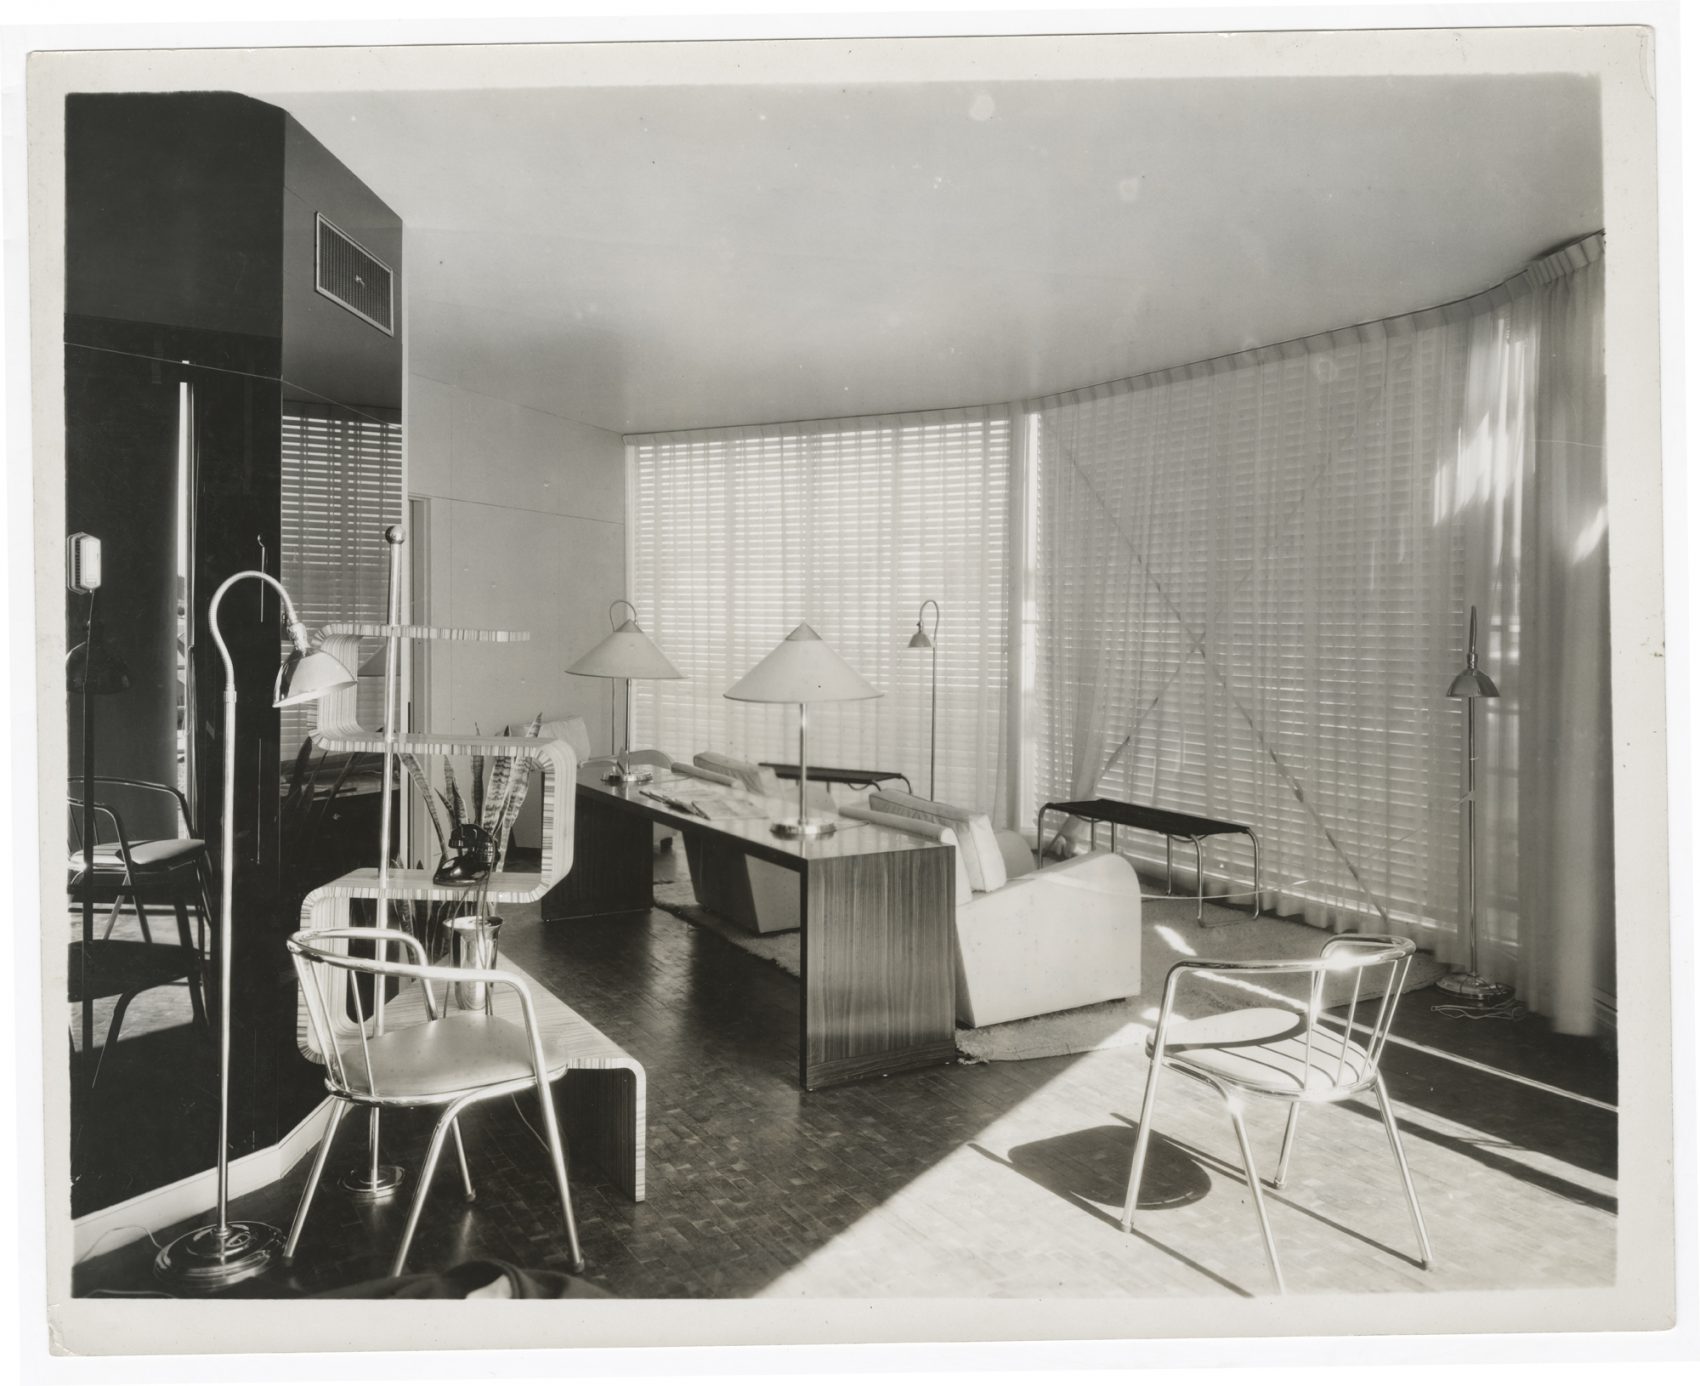 An interior view of the living room in the &quot;House of Tomorrow,&quot; designed by George Keck for the Home and Industrial Arts exhibit at the Century of Progress World's Fair in Chicago in 1933. (Courtesy Chicago History Museum)